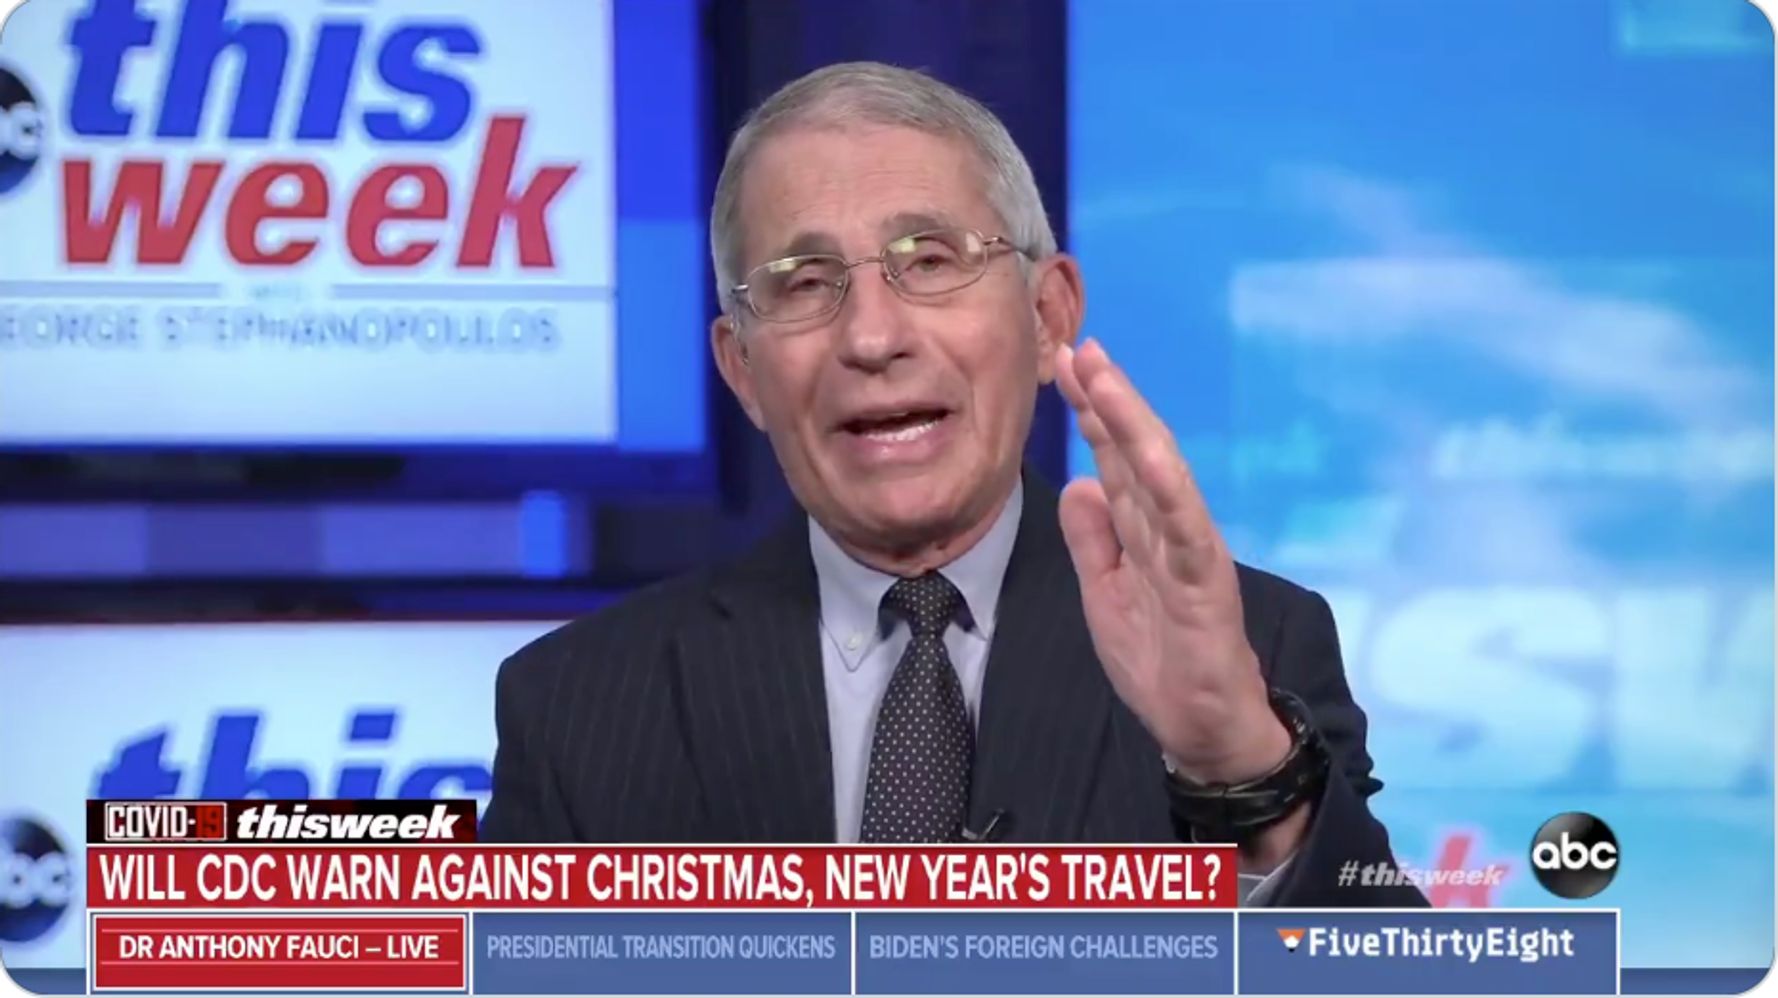 Fauci Warns Of COVID-19 'Surge Upon A Surge' As Millions Travel Over Holidays